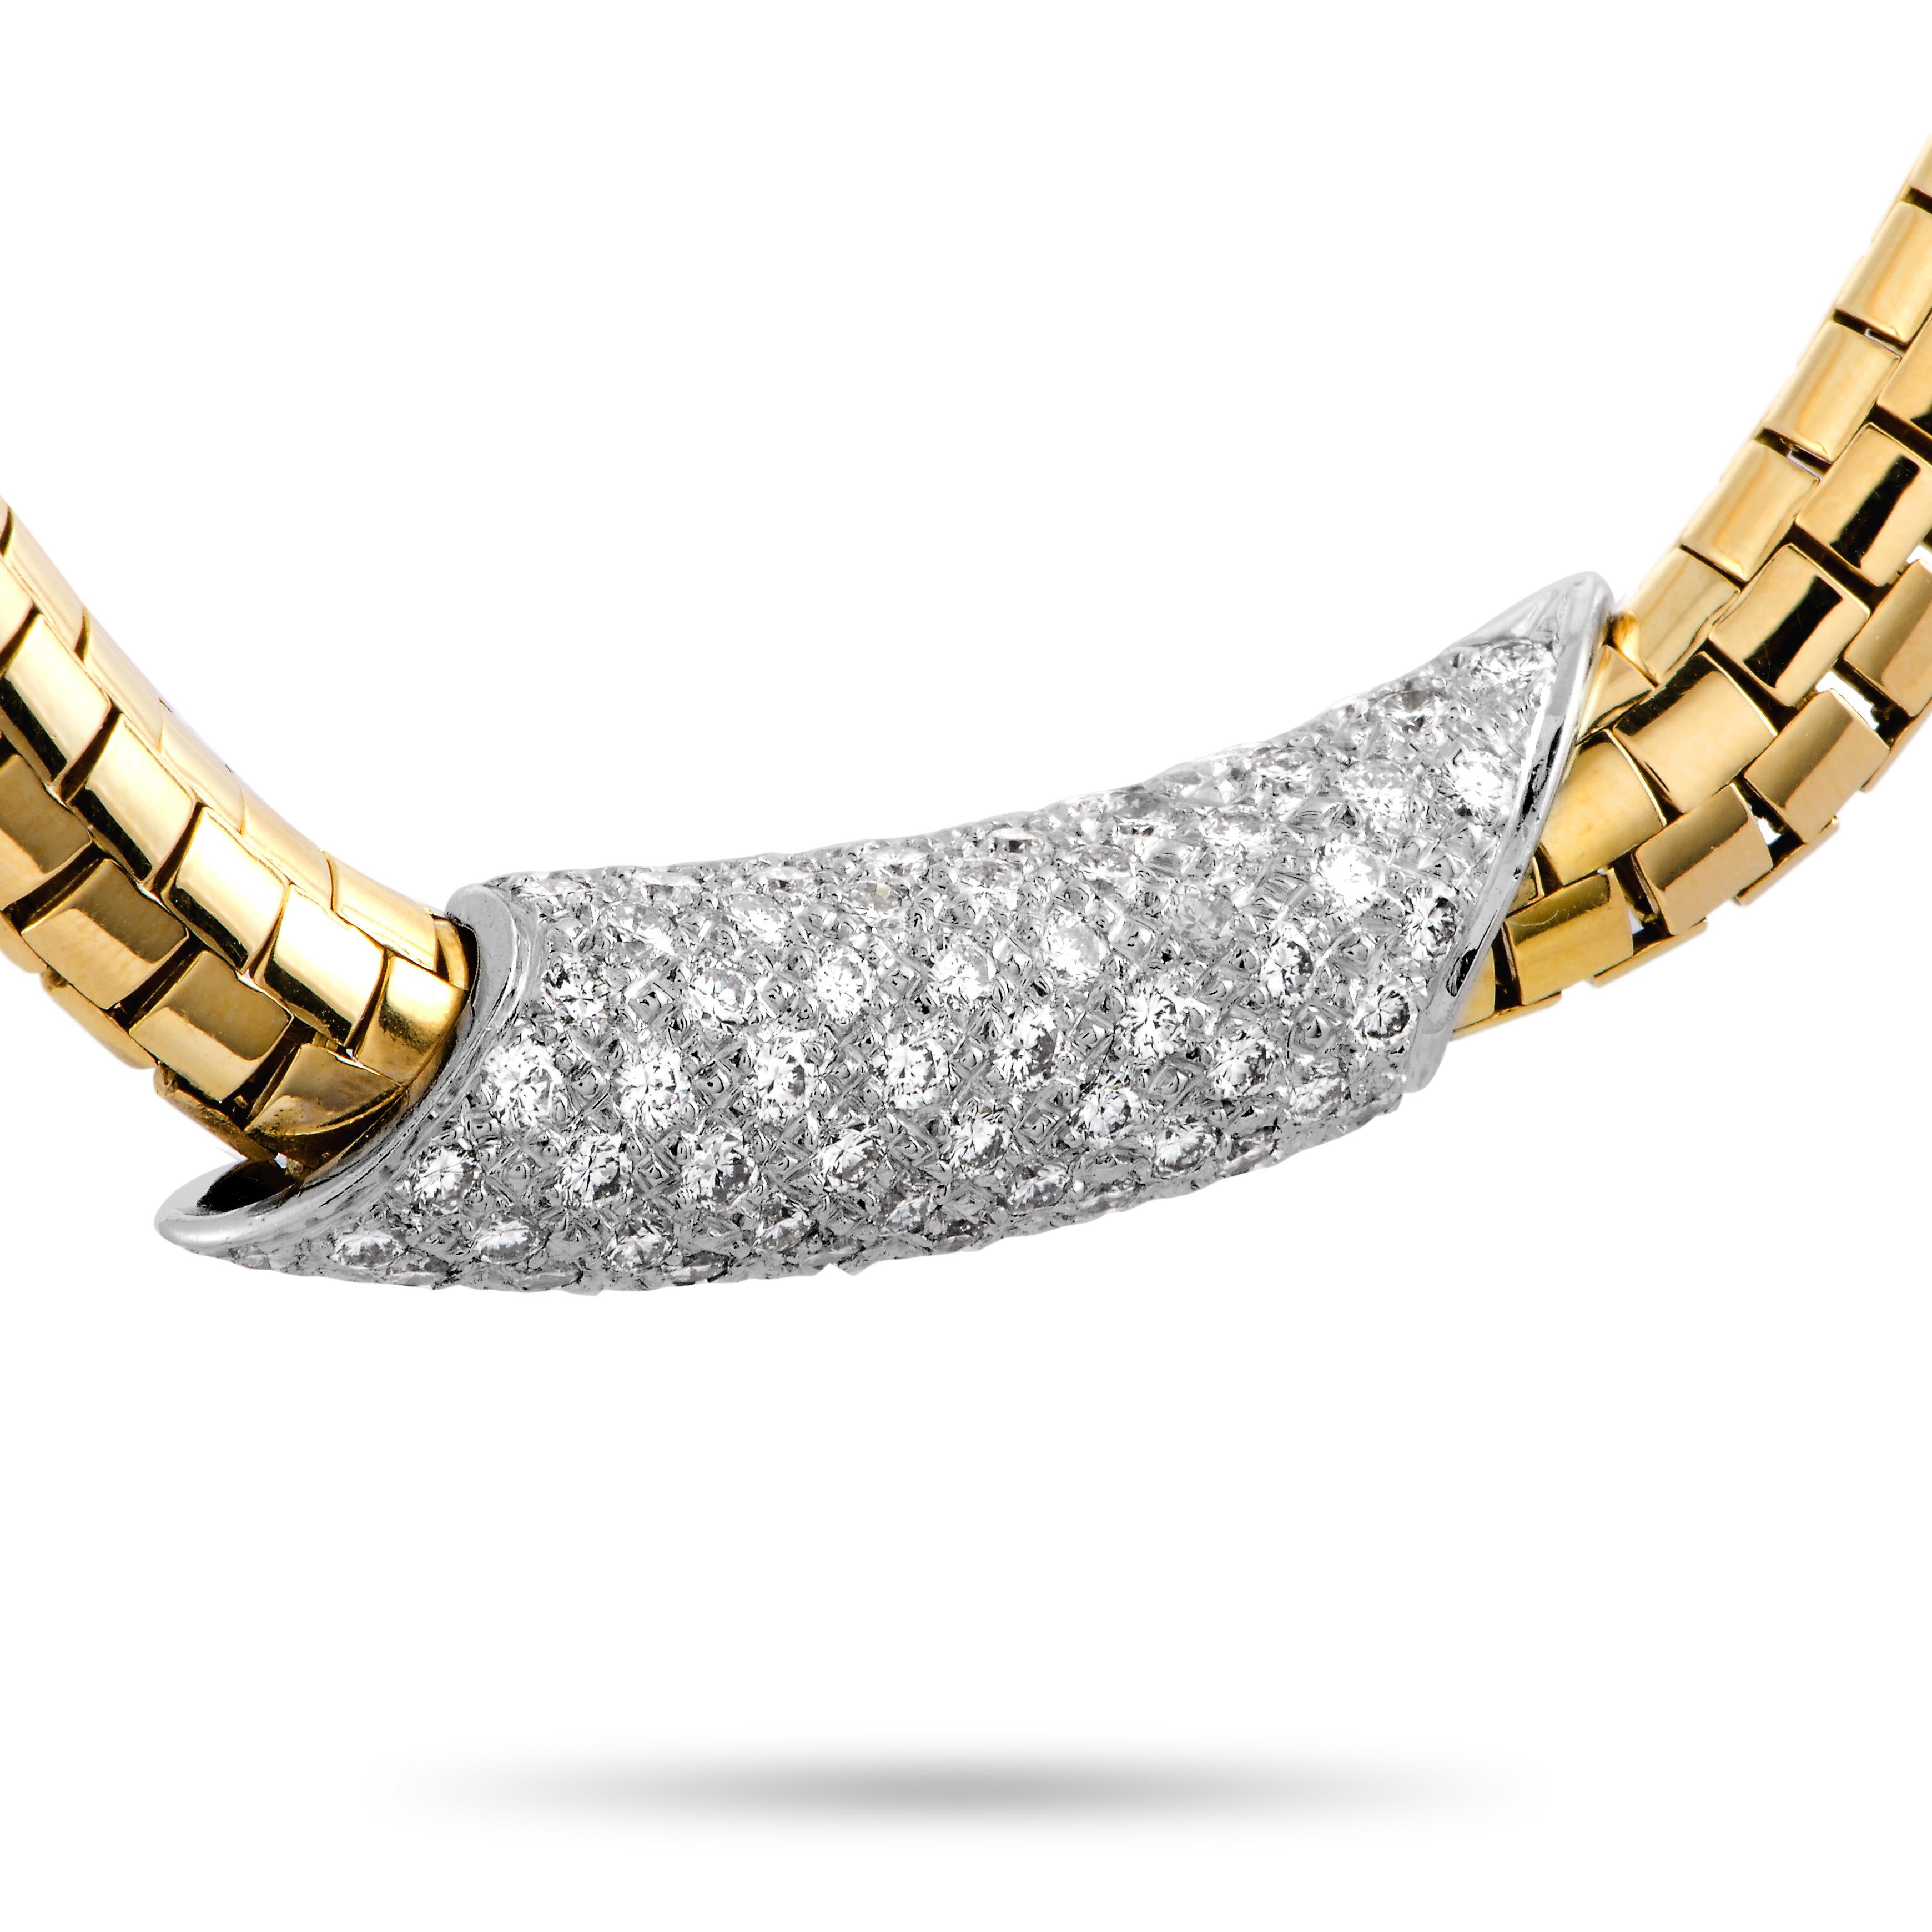 This Henry Dunay necklace is made of 18K yellow gold and platinum and weighs 75 grams, measuring 15” in length. The necklace is set with diamonds that boast grade F color and VS1 clarity and amount to 2.75 carats.

Offered in estate condition, this